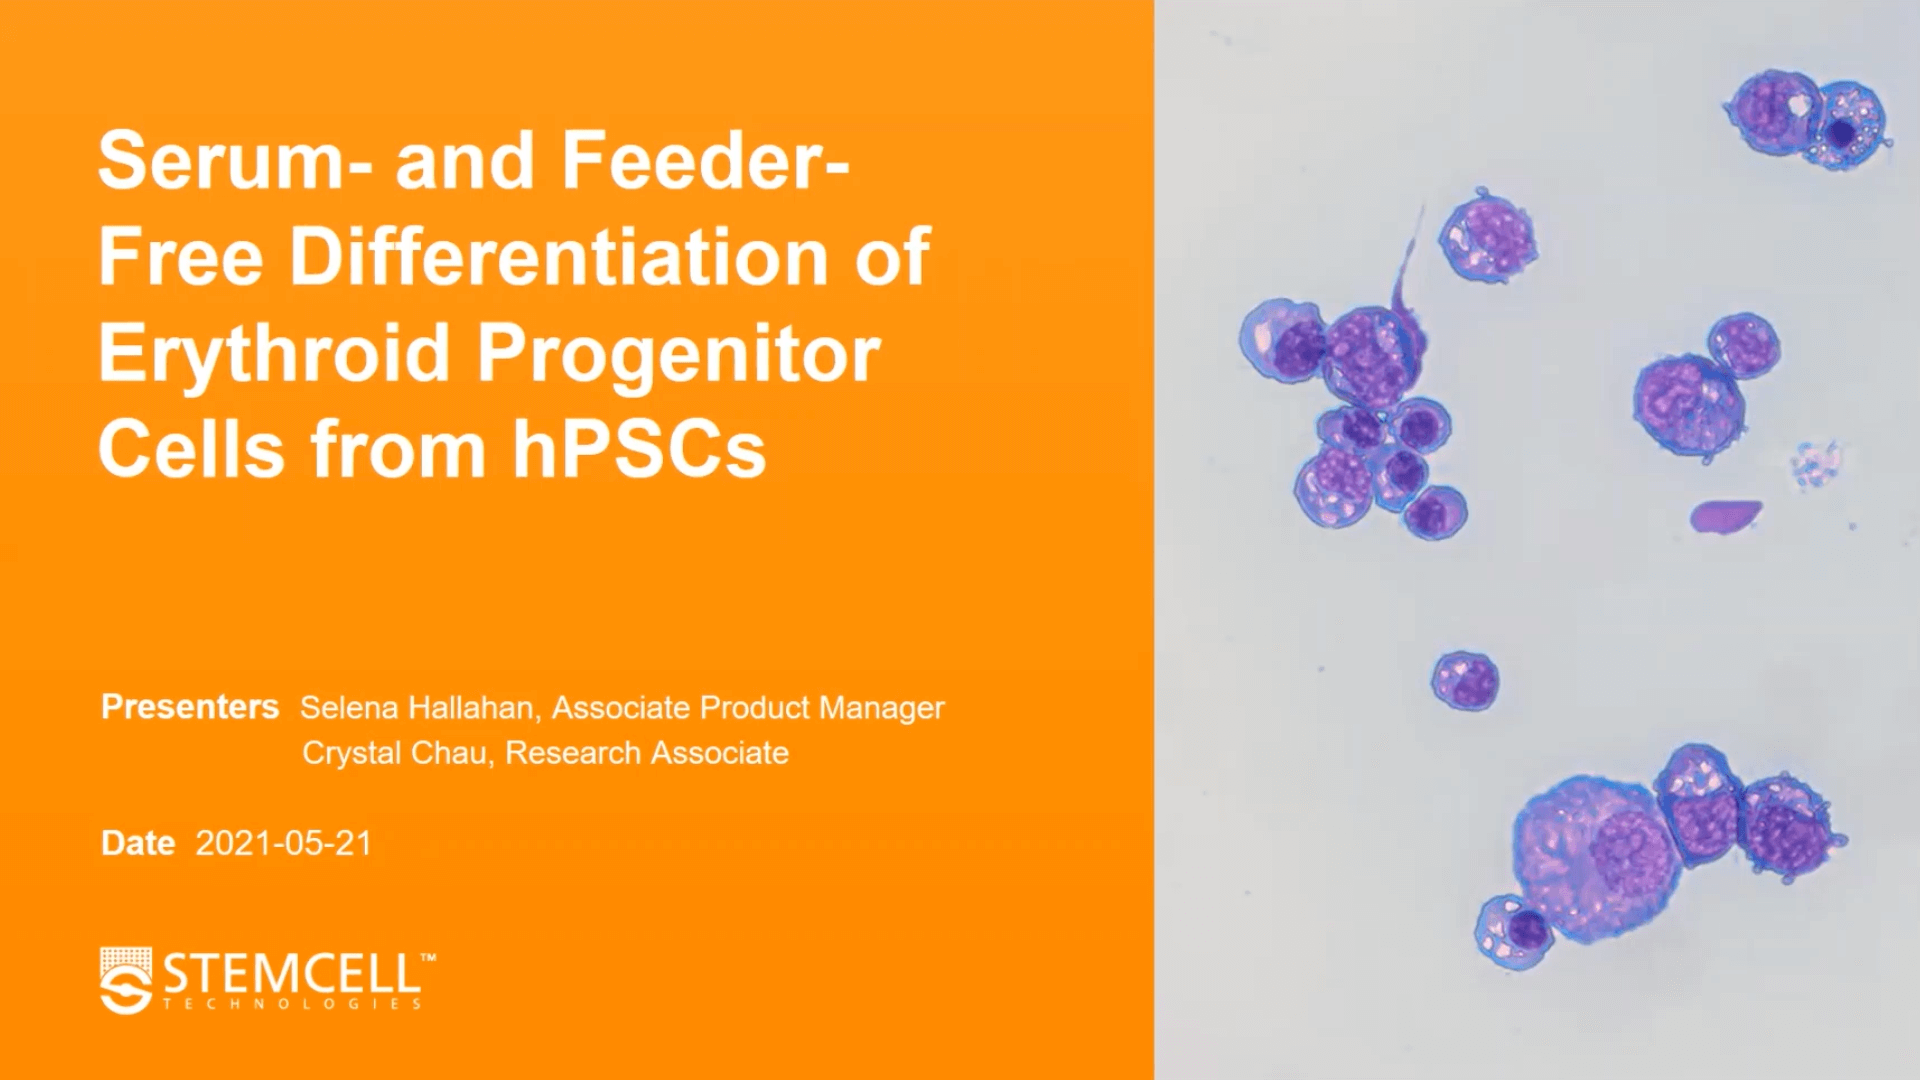 Serum- and Feeder-Free Differentiation of Erythroid Progenitor Cells from hPSCs